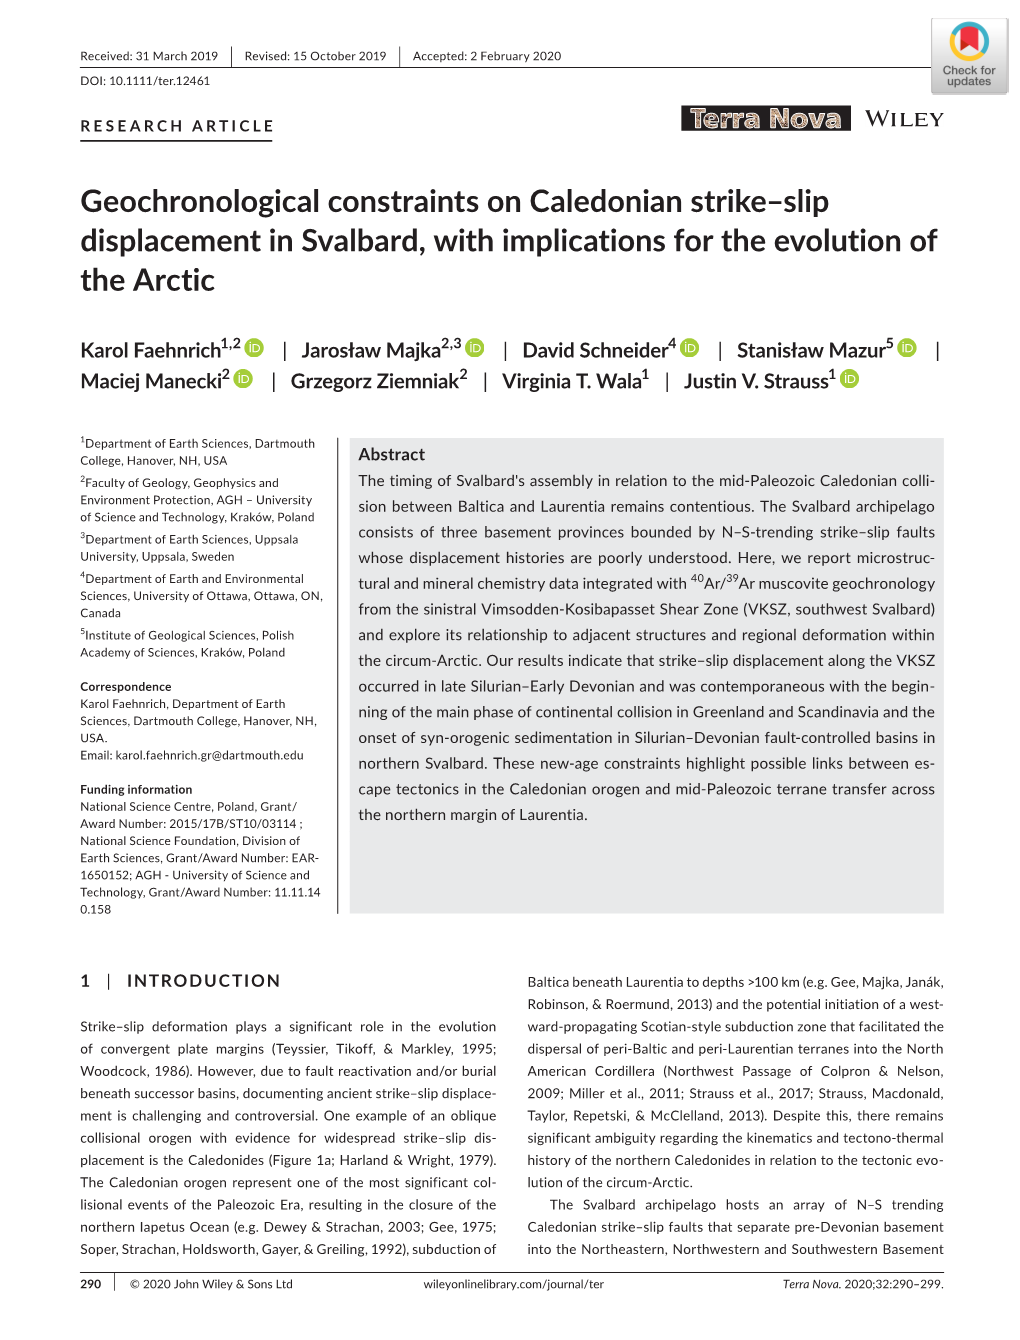 Geochronological Constraints on Caledonian Strike–Slip Displacement in Svalbard, with Implications for the Evolution of the Arctic